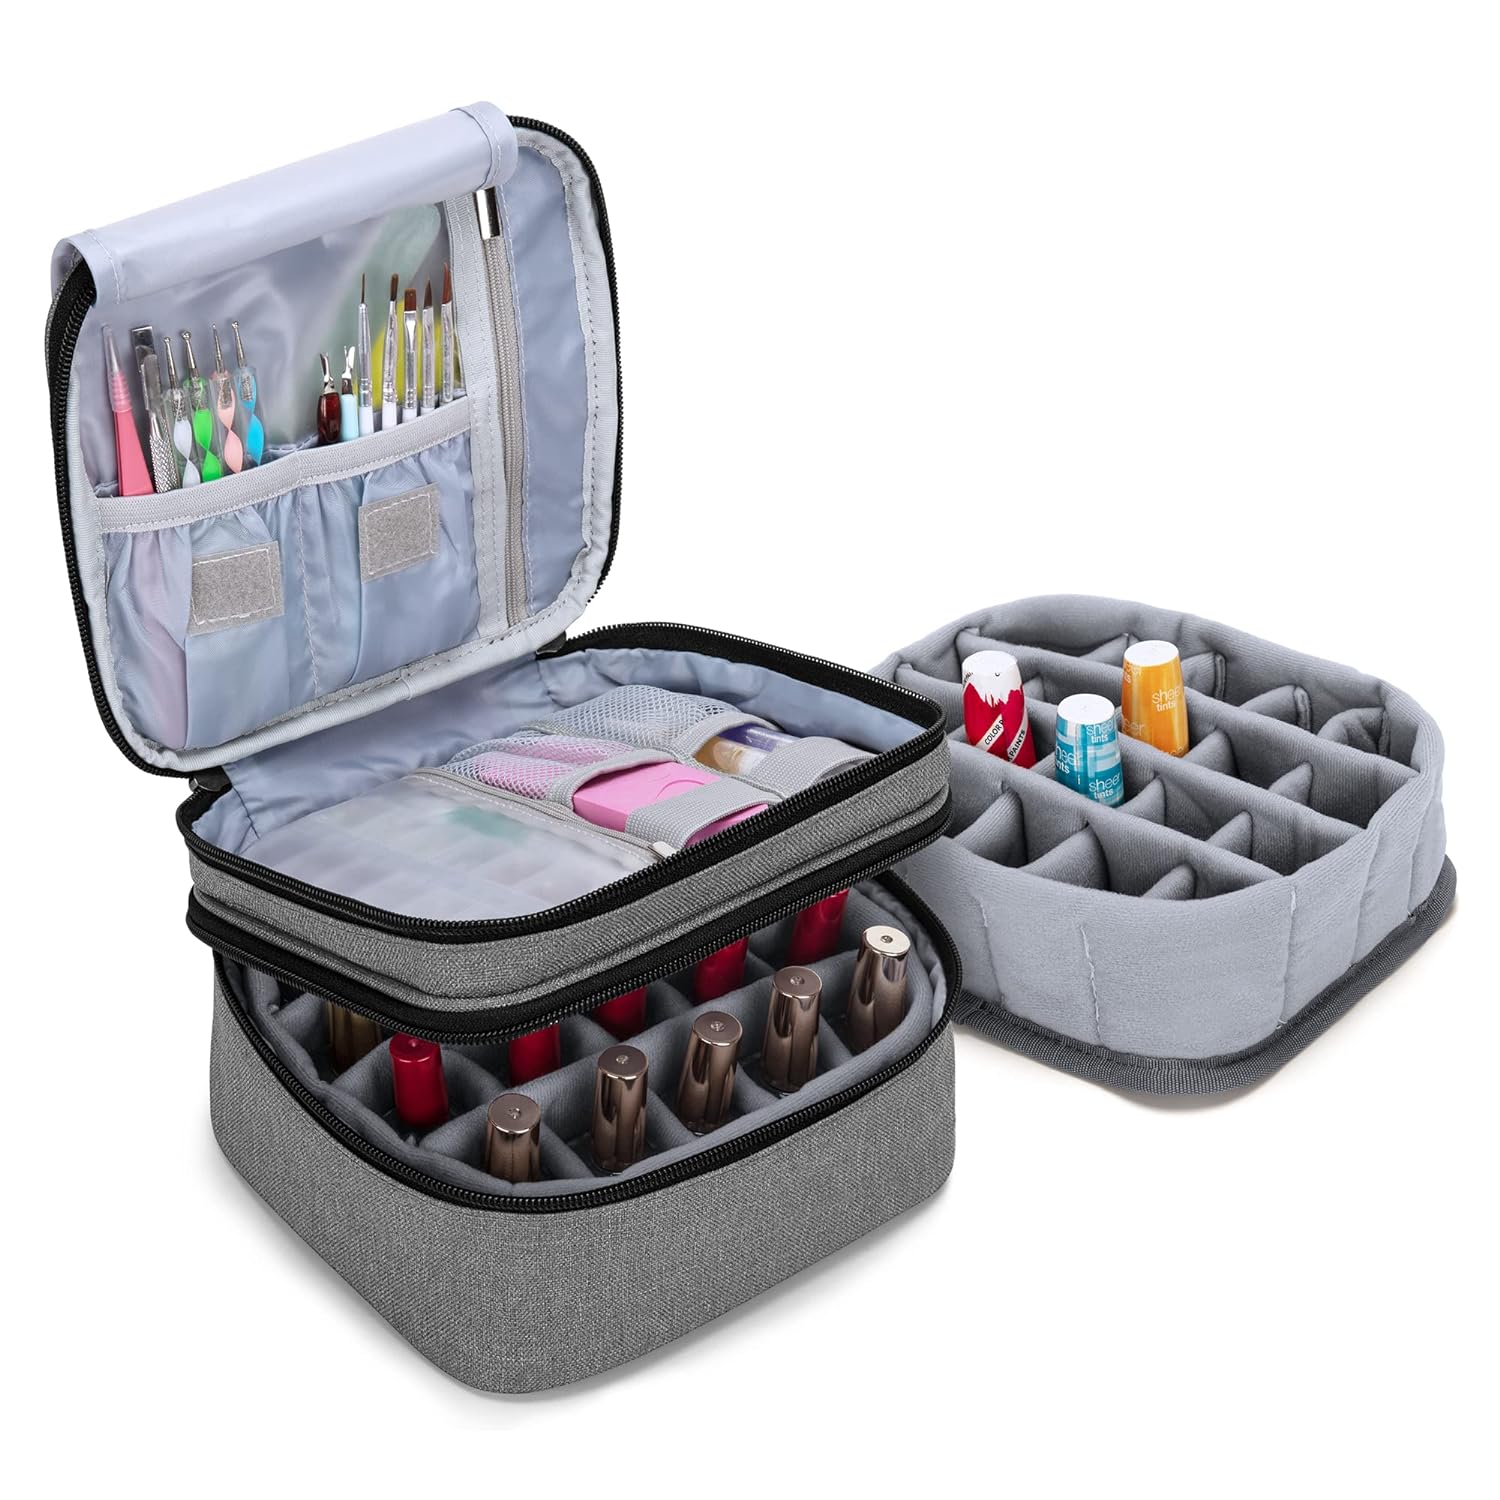 LUXJA Nail Polish Carrying Case - Holds 20 Bottles (15ml - 0.5 fl.oz), Double-layer Organizer for Nail Polish and Manicure Set, Gray